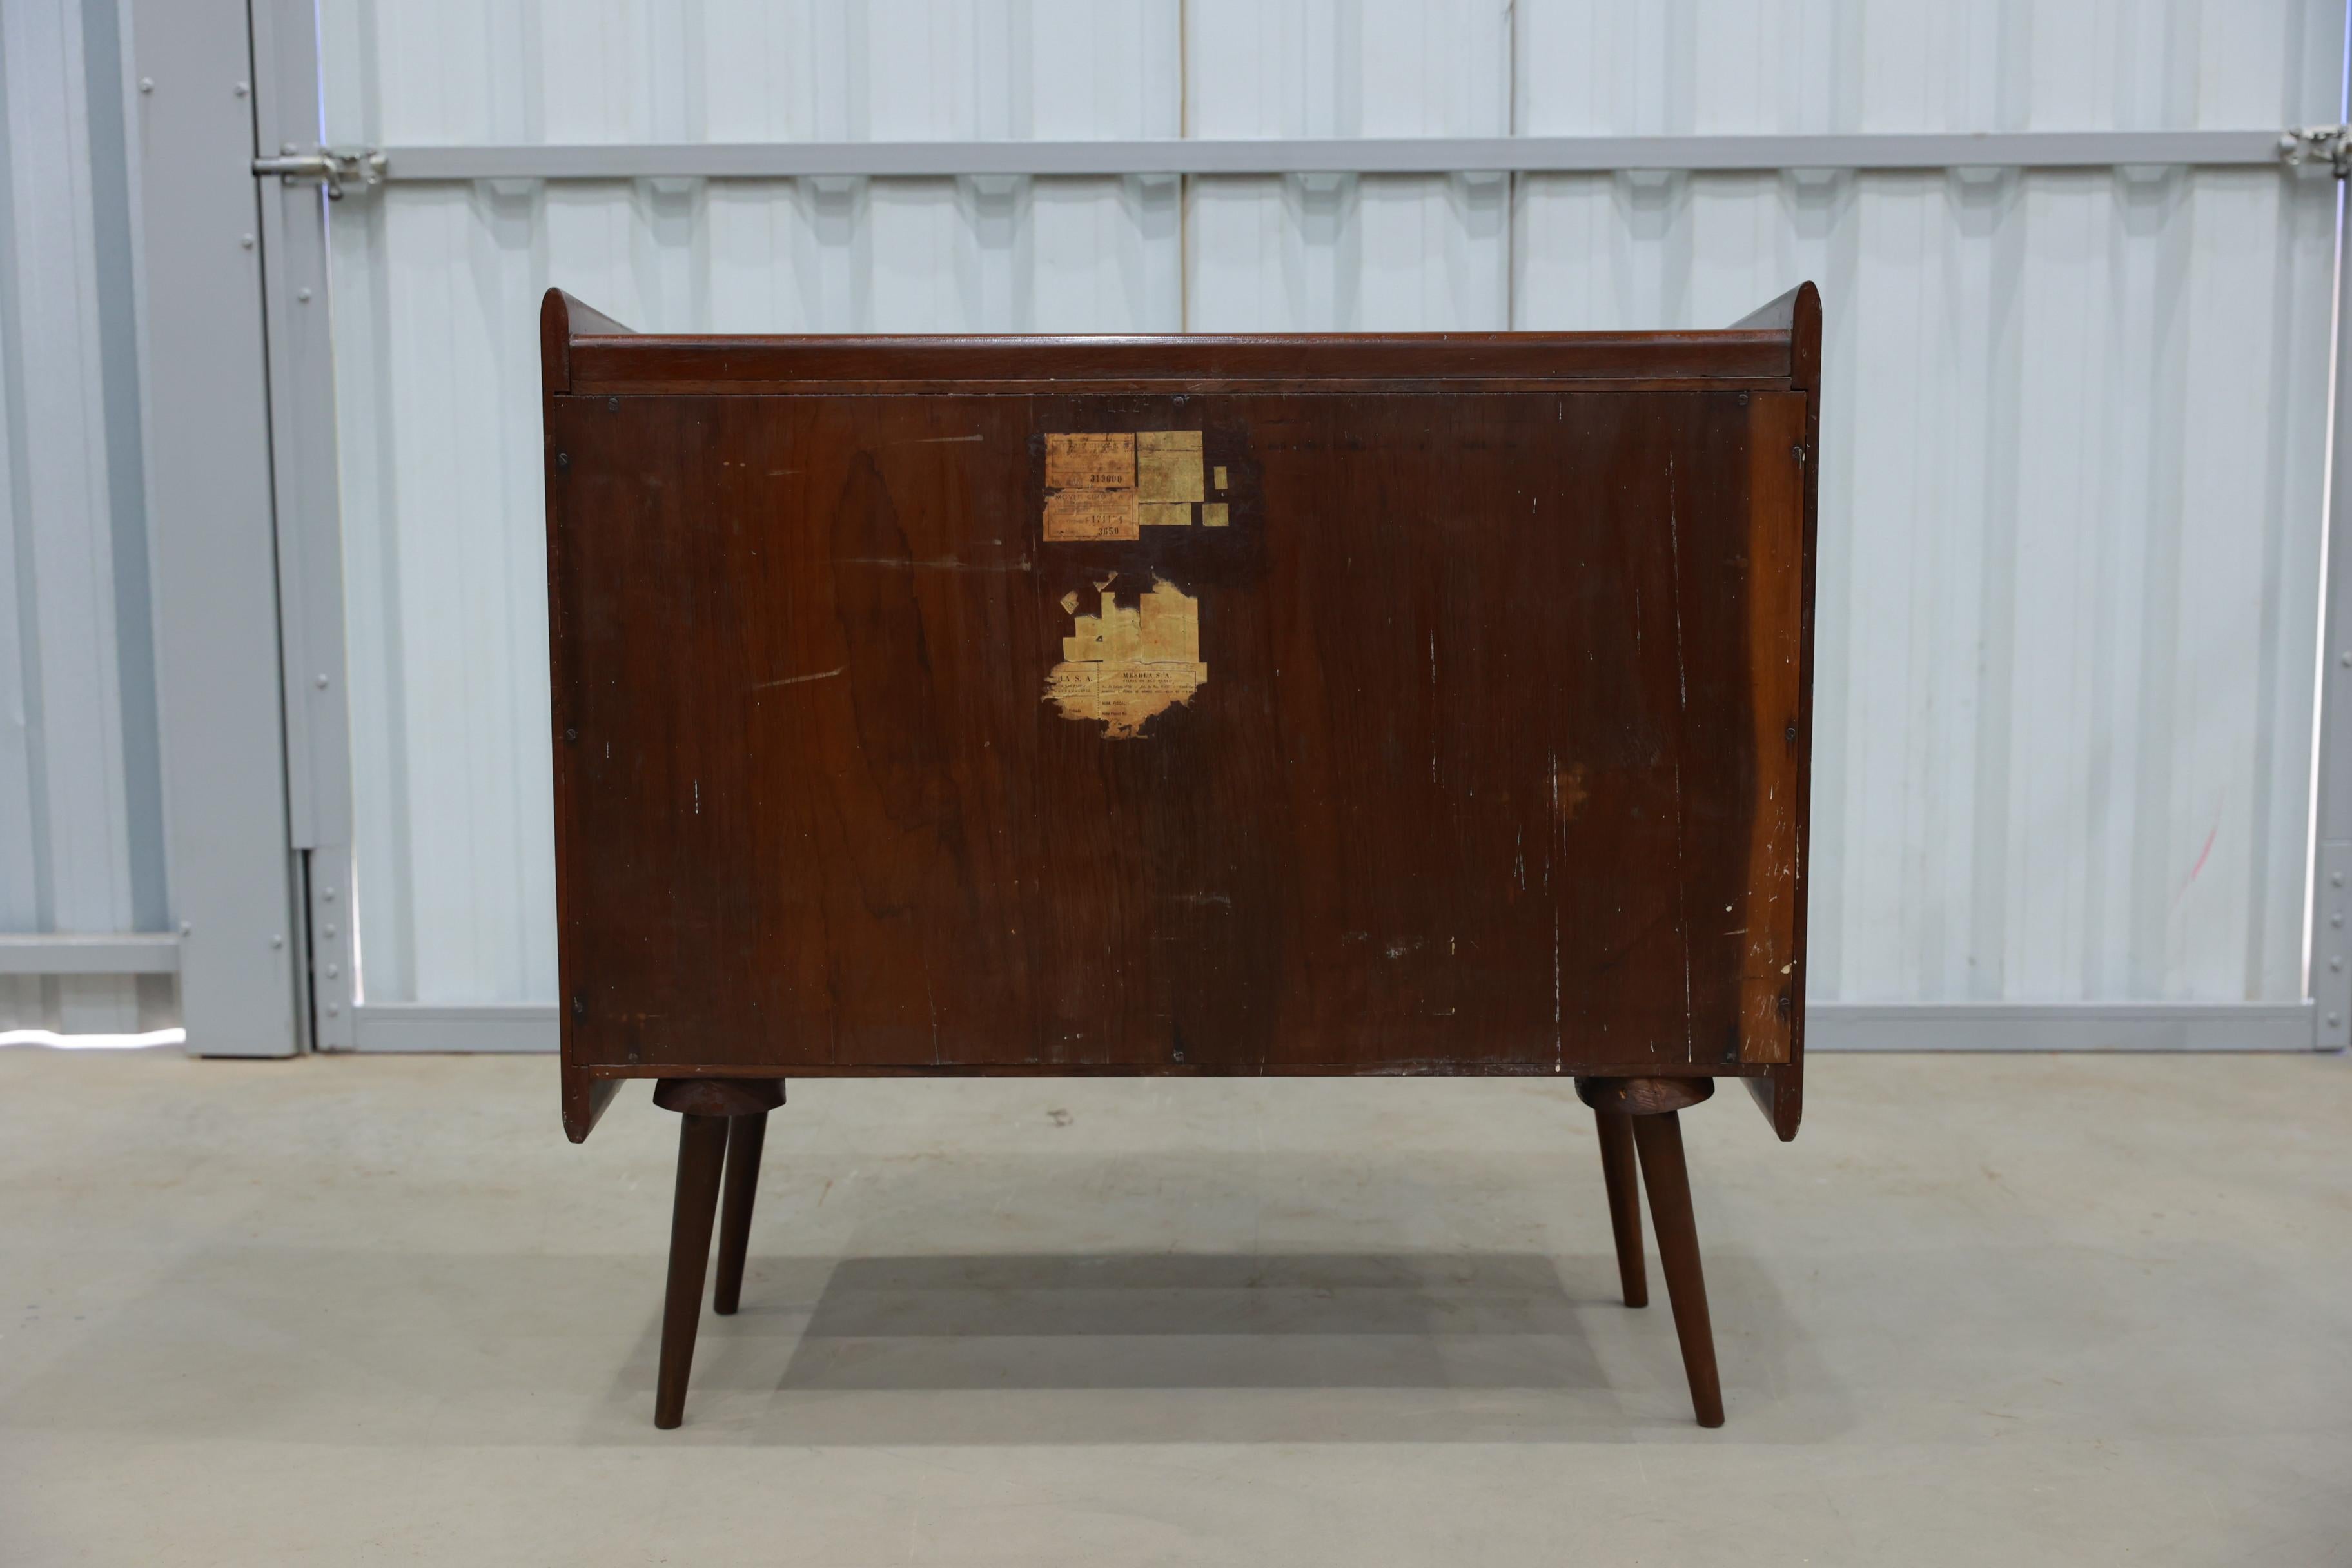 Brazilian Modern Chest of Drawers in Hardwood by Moveis Cimo, 1950s, Brazil For Sale 4